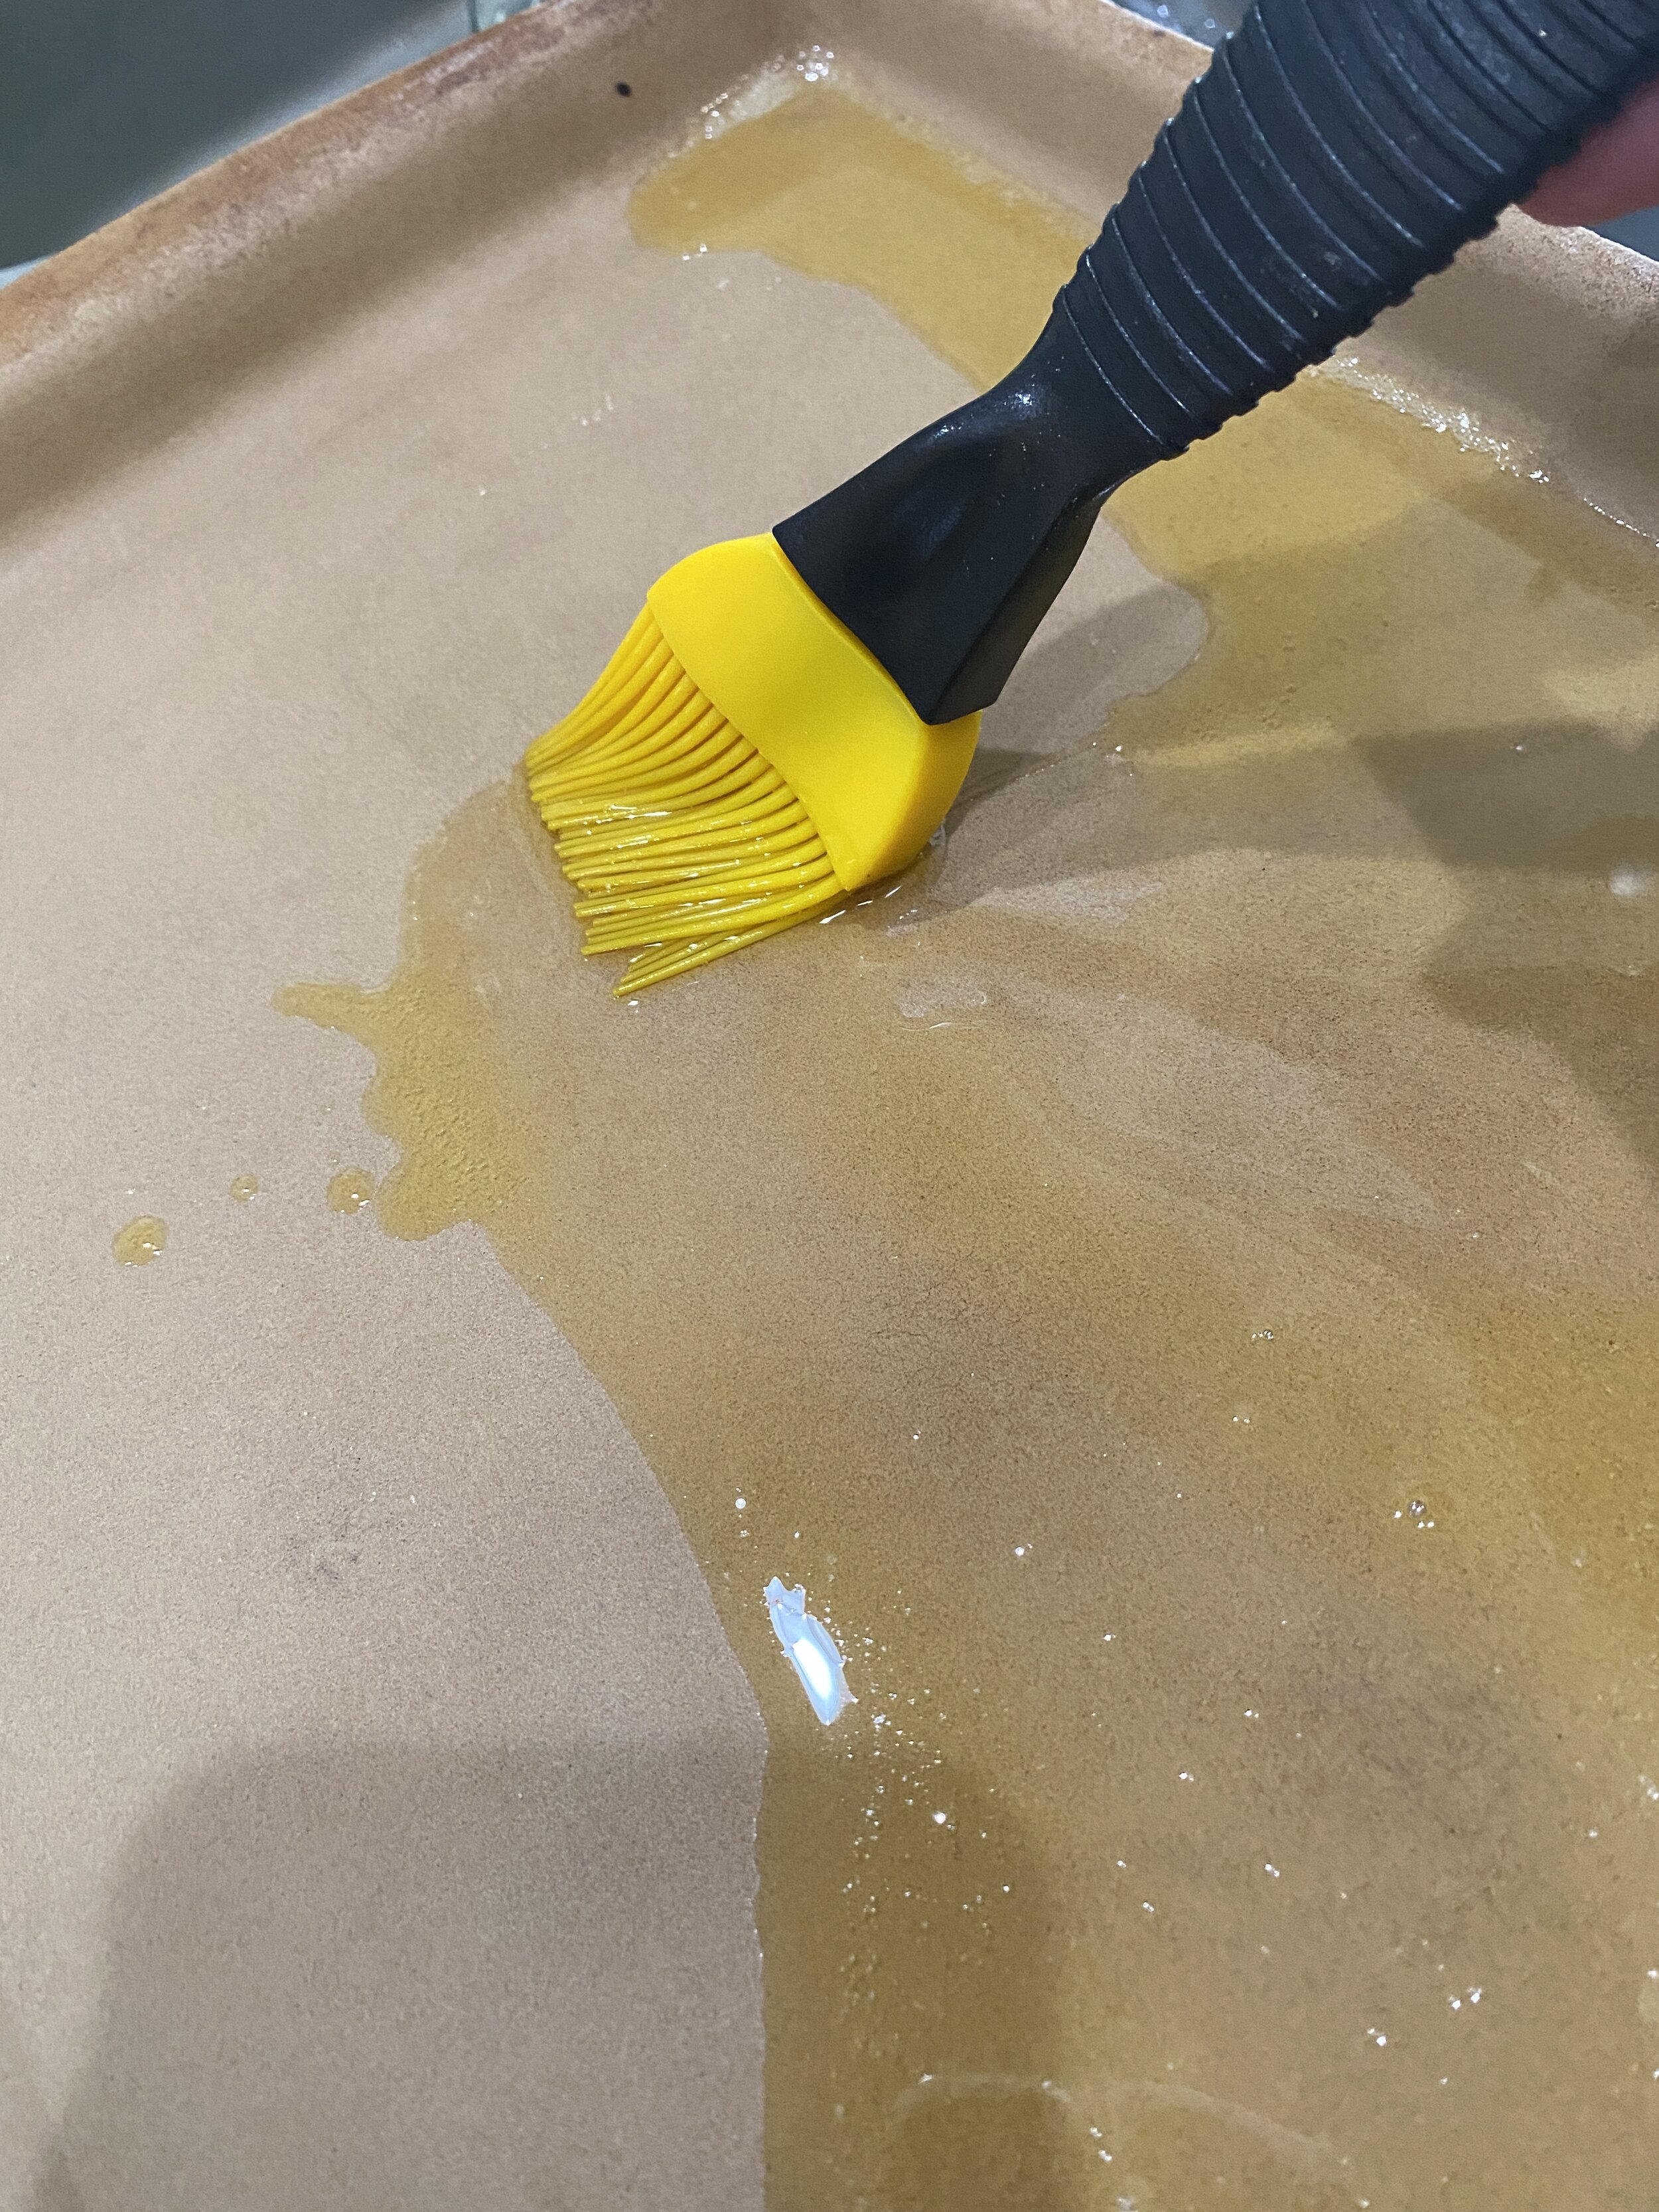 Treating baking dish with clarified butter